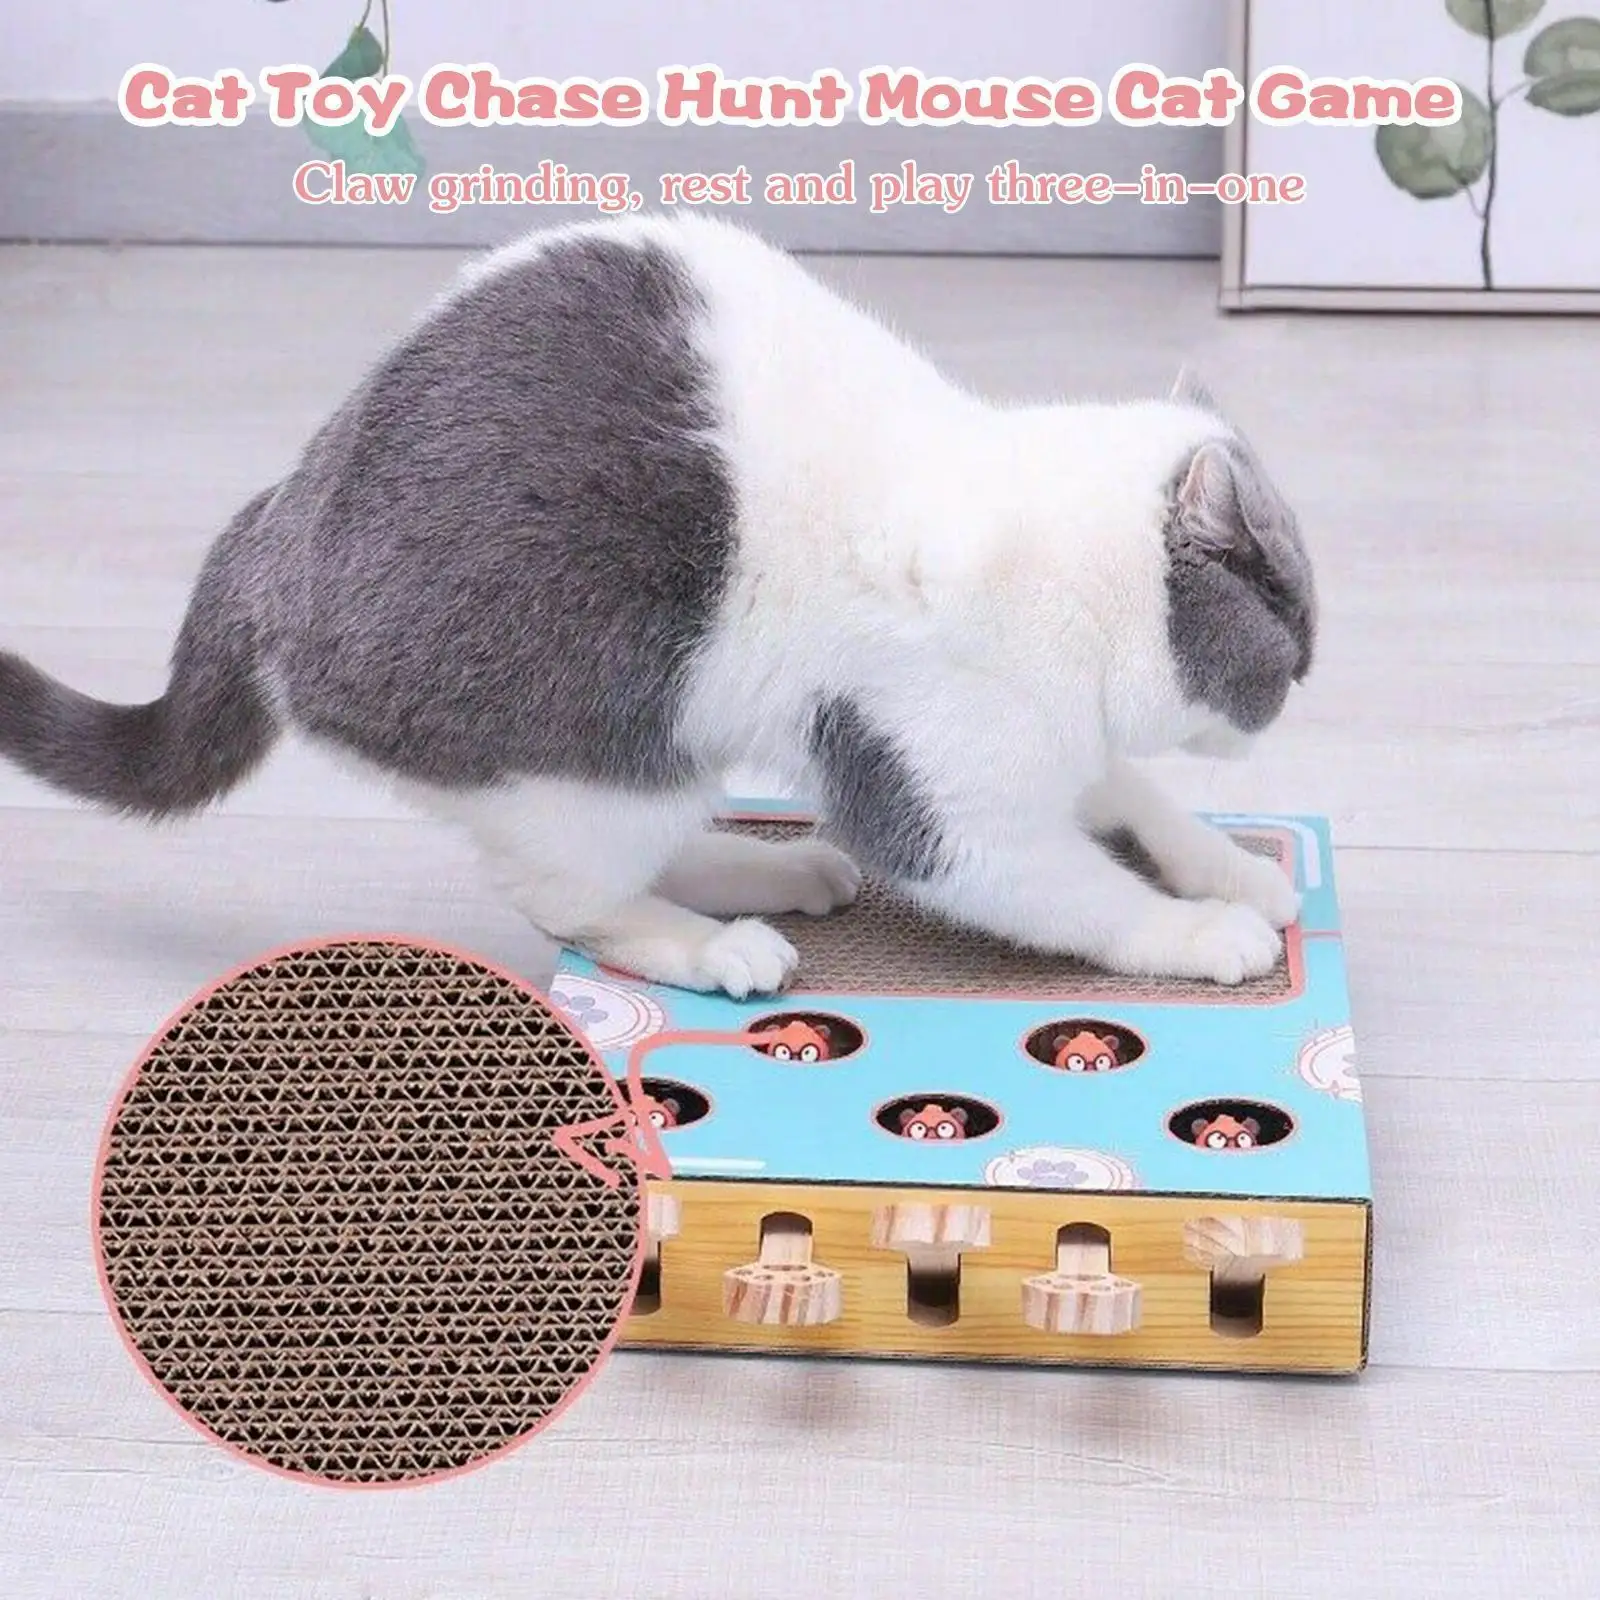 Toy Hunt Mouse Game Box 3 In 1 With Scratcher Board Gophers Hit Maze Toy Funny Interactive Stick Teas Z9q4